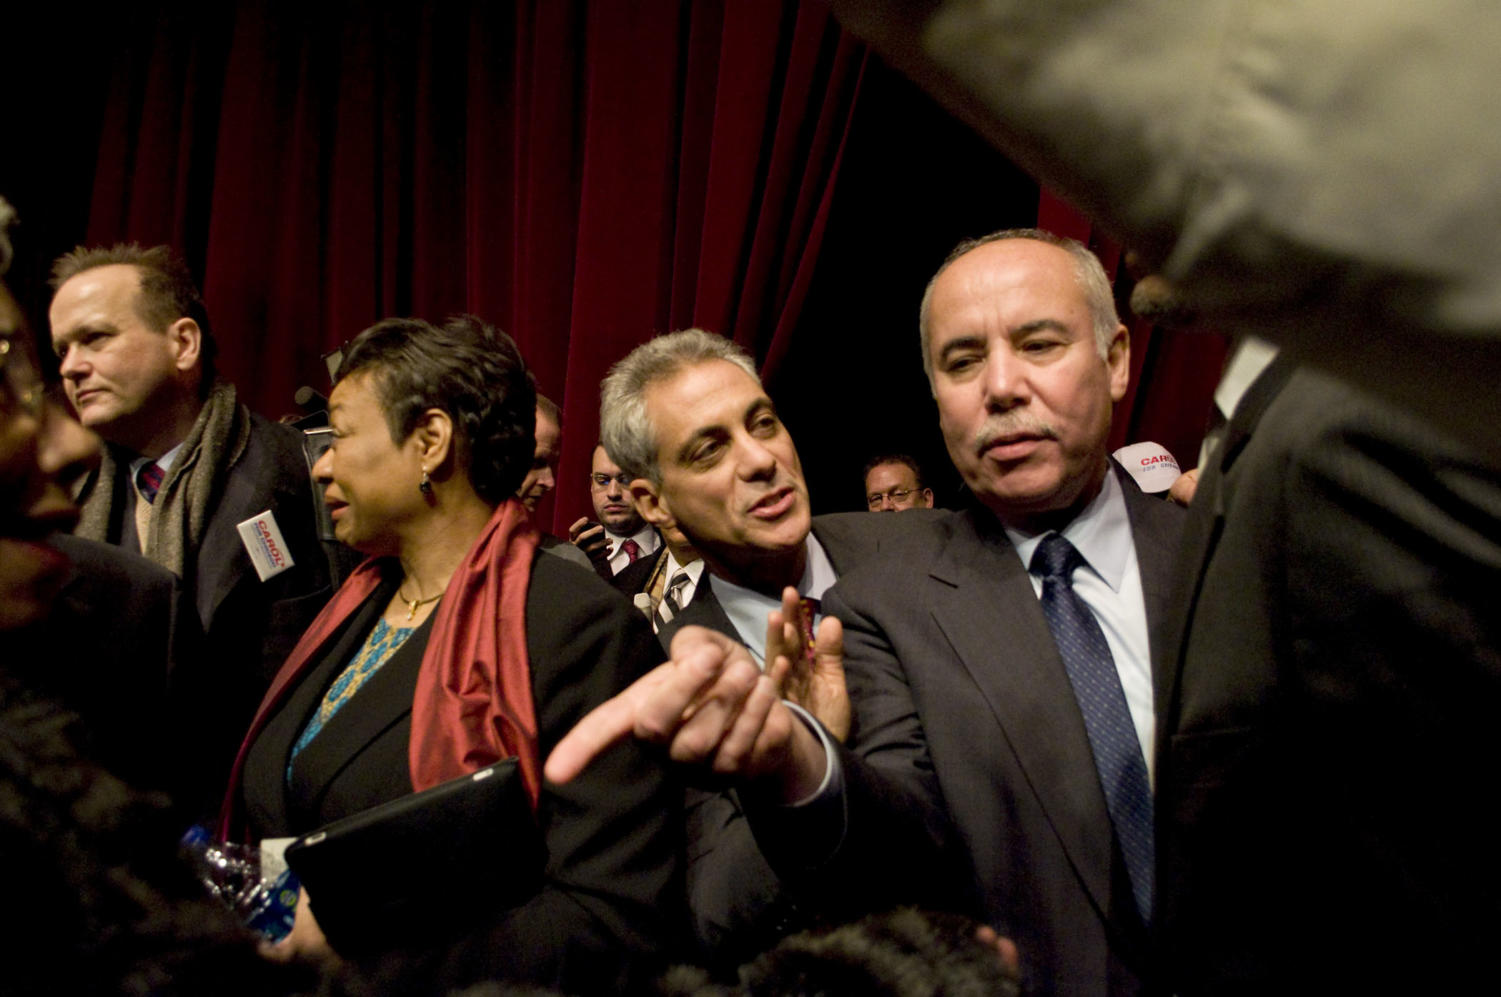 Rahm Emanuel and Del Valle make their way towards the front of the stage for a group photograph.